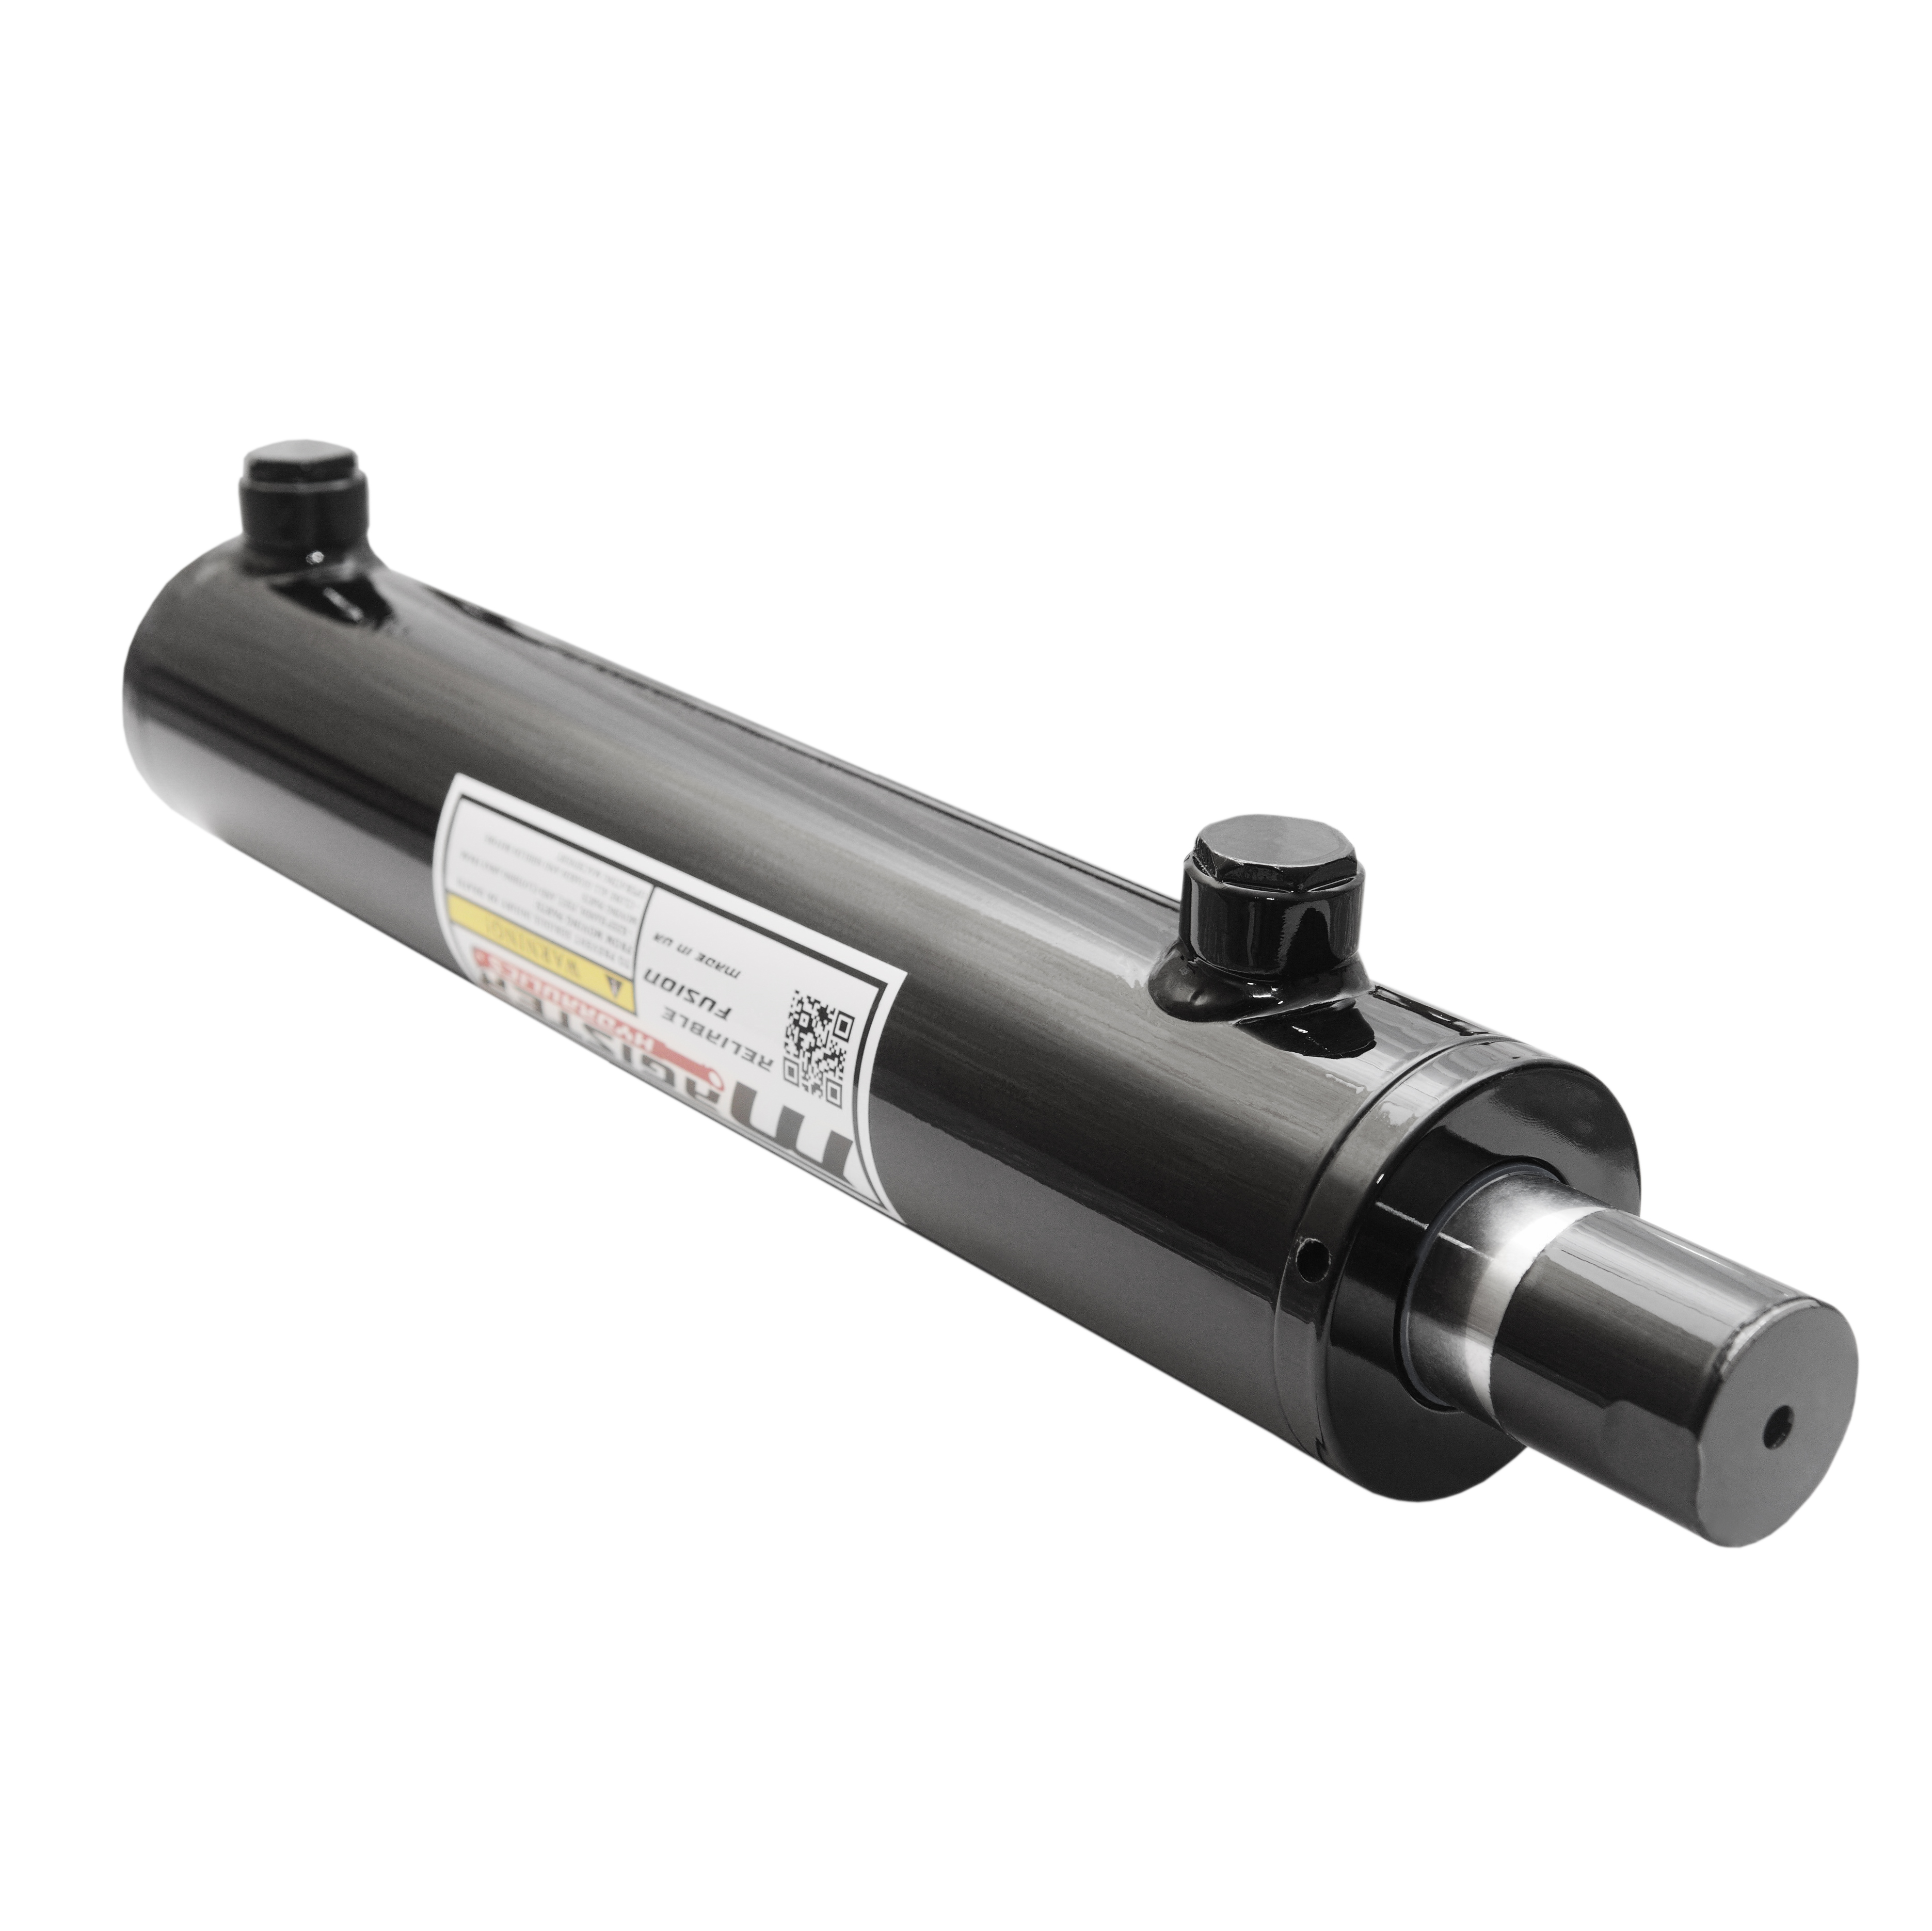 2 bore x 18 stroke hydraulic cylinder, welded universal double acting cylinder | Magister Hydraulics